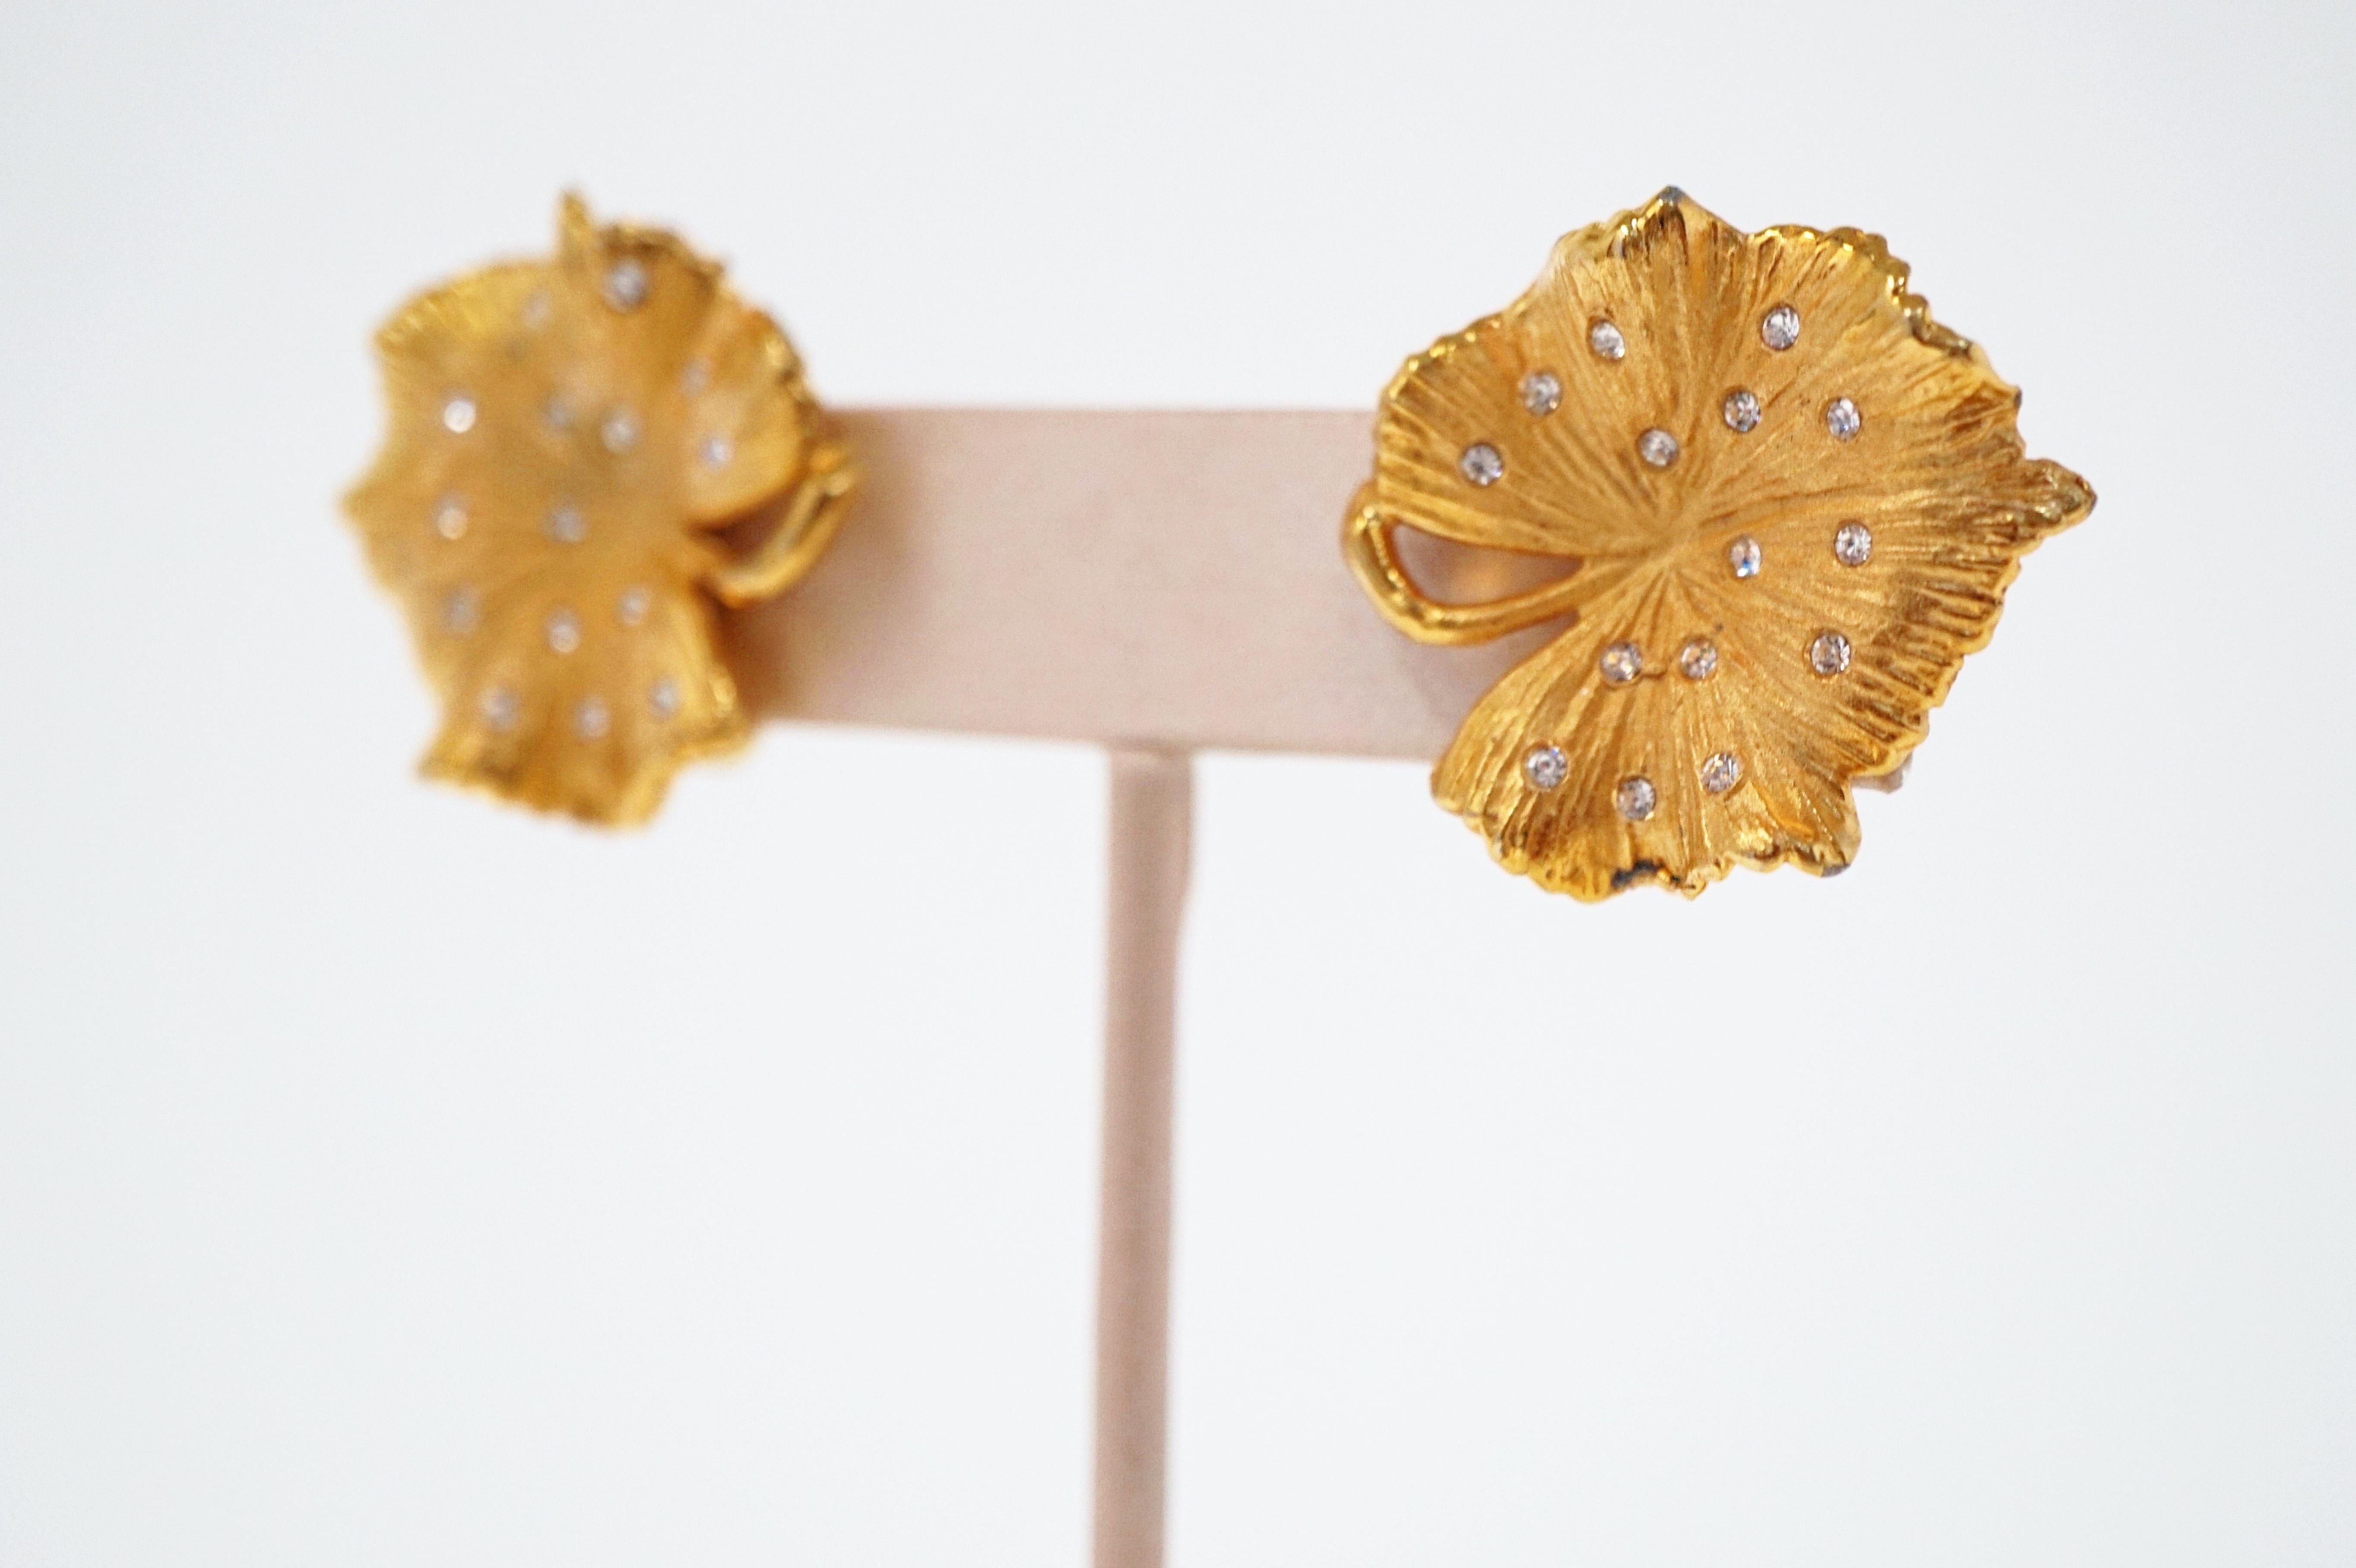 Vintage Gilded Leaf Earrings with Crystal Accents by Claudette, circa 1950s 5